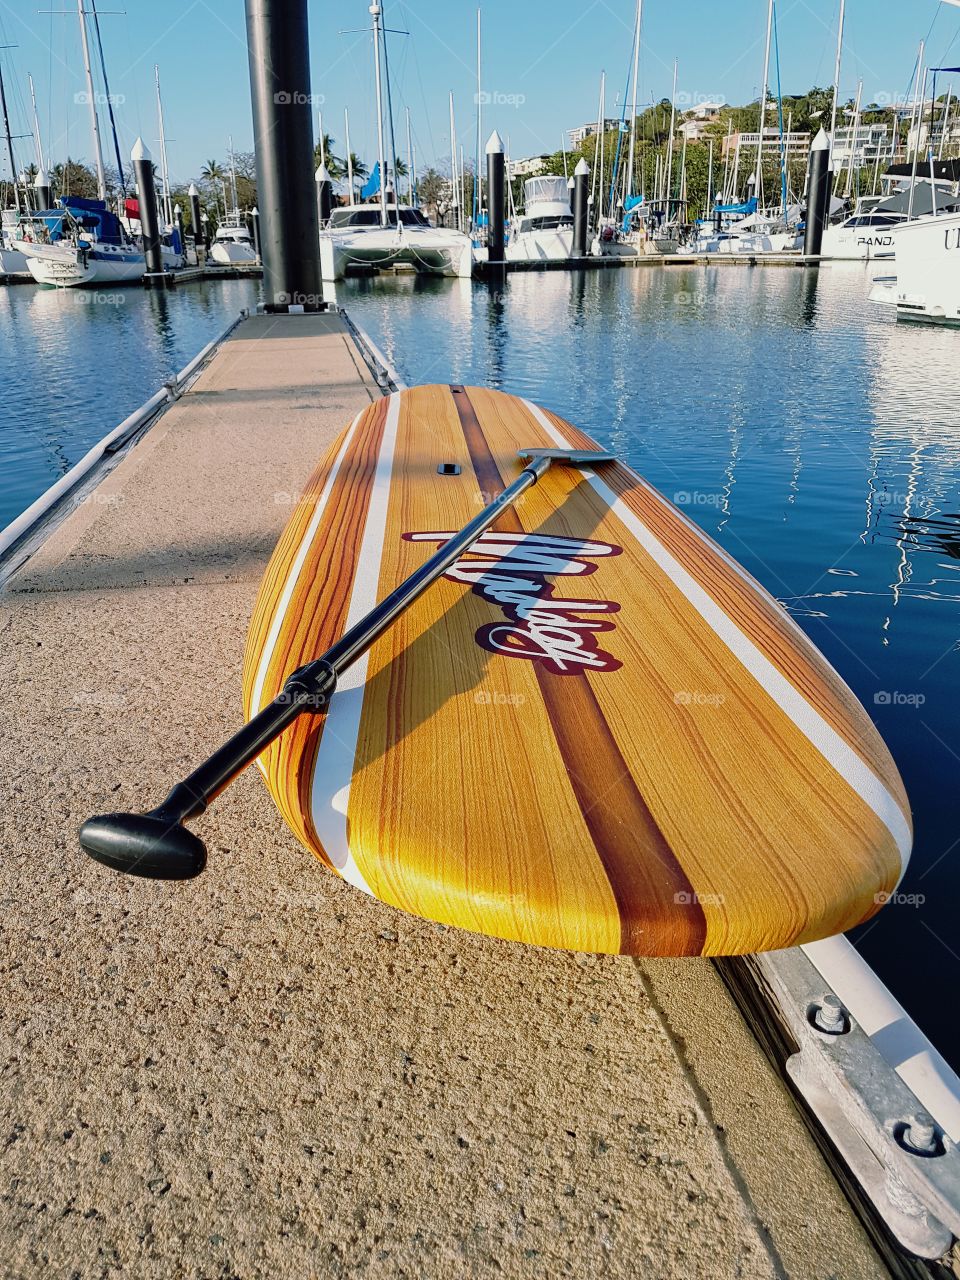 Time for a paddle